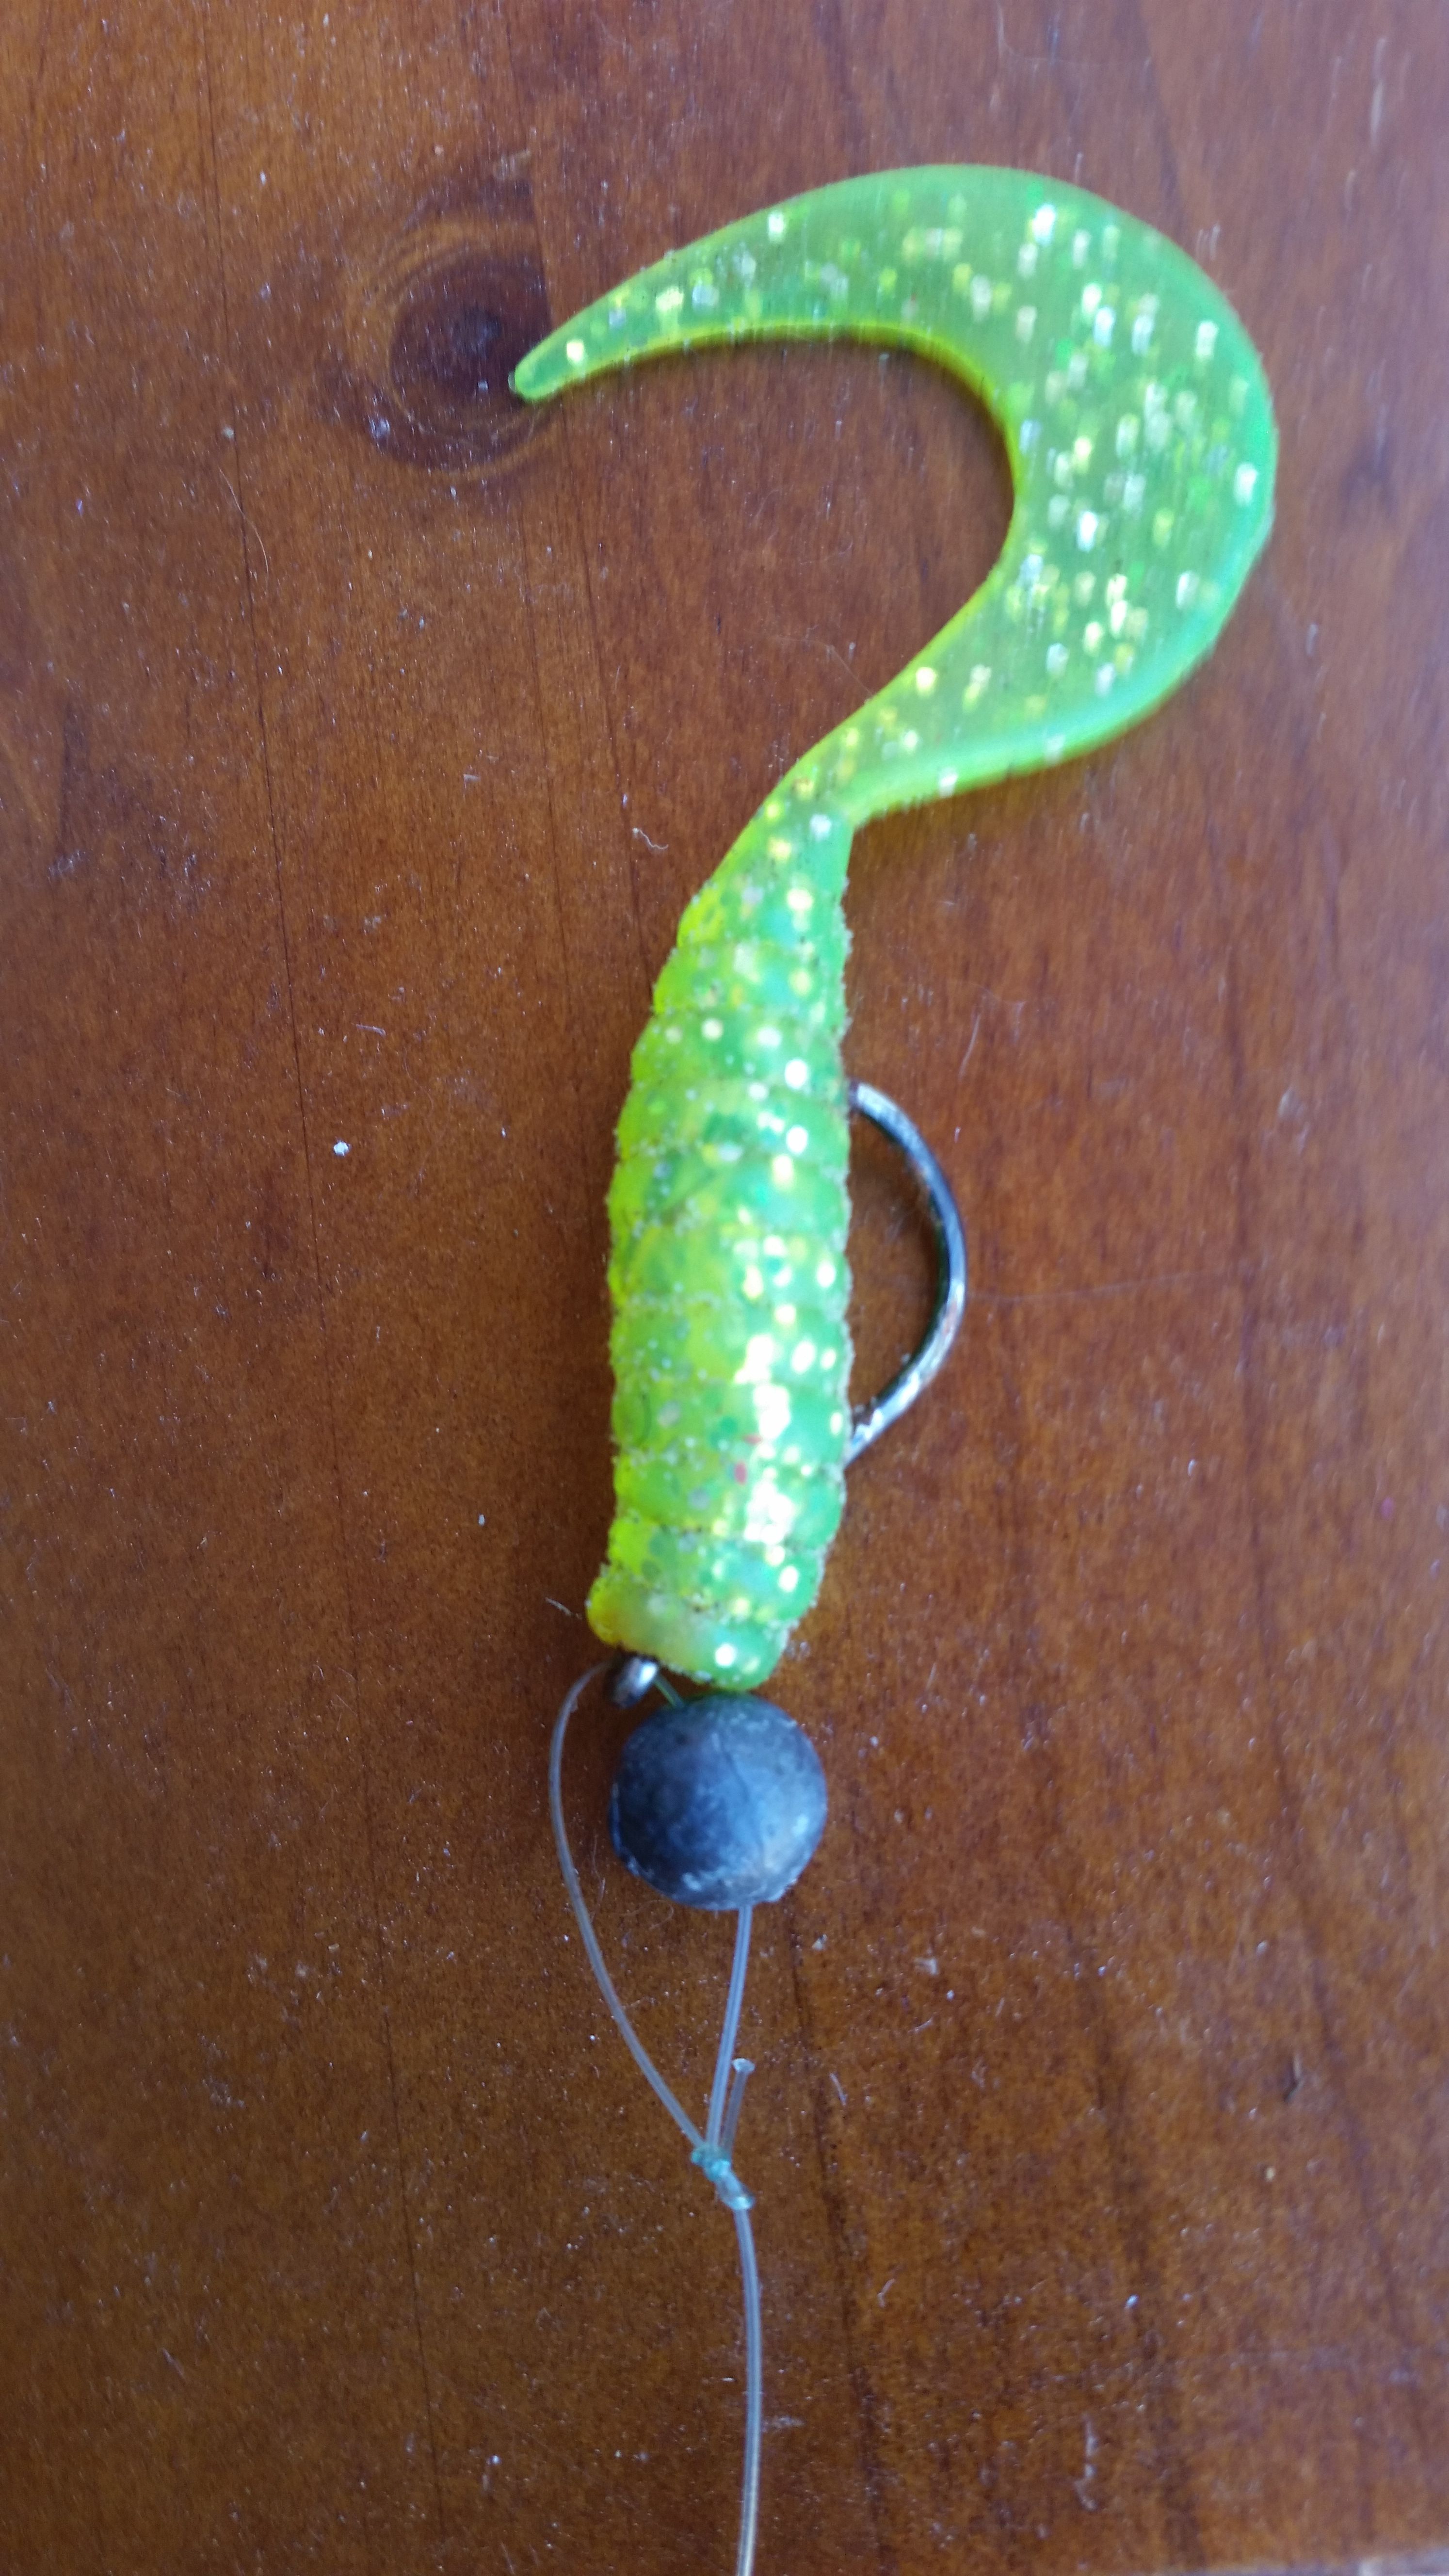 Fishing with soft plastics without jigheads? - Fishing Chat - DECKEE  Community